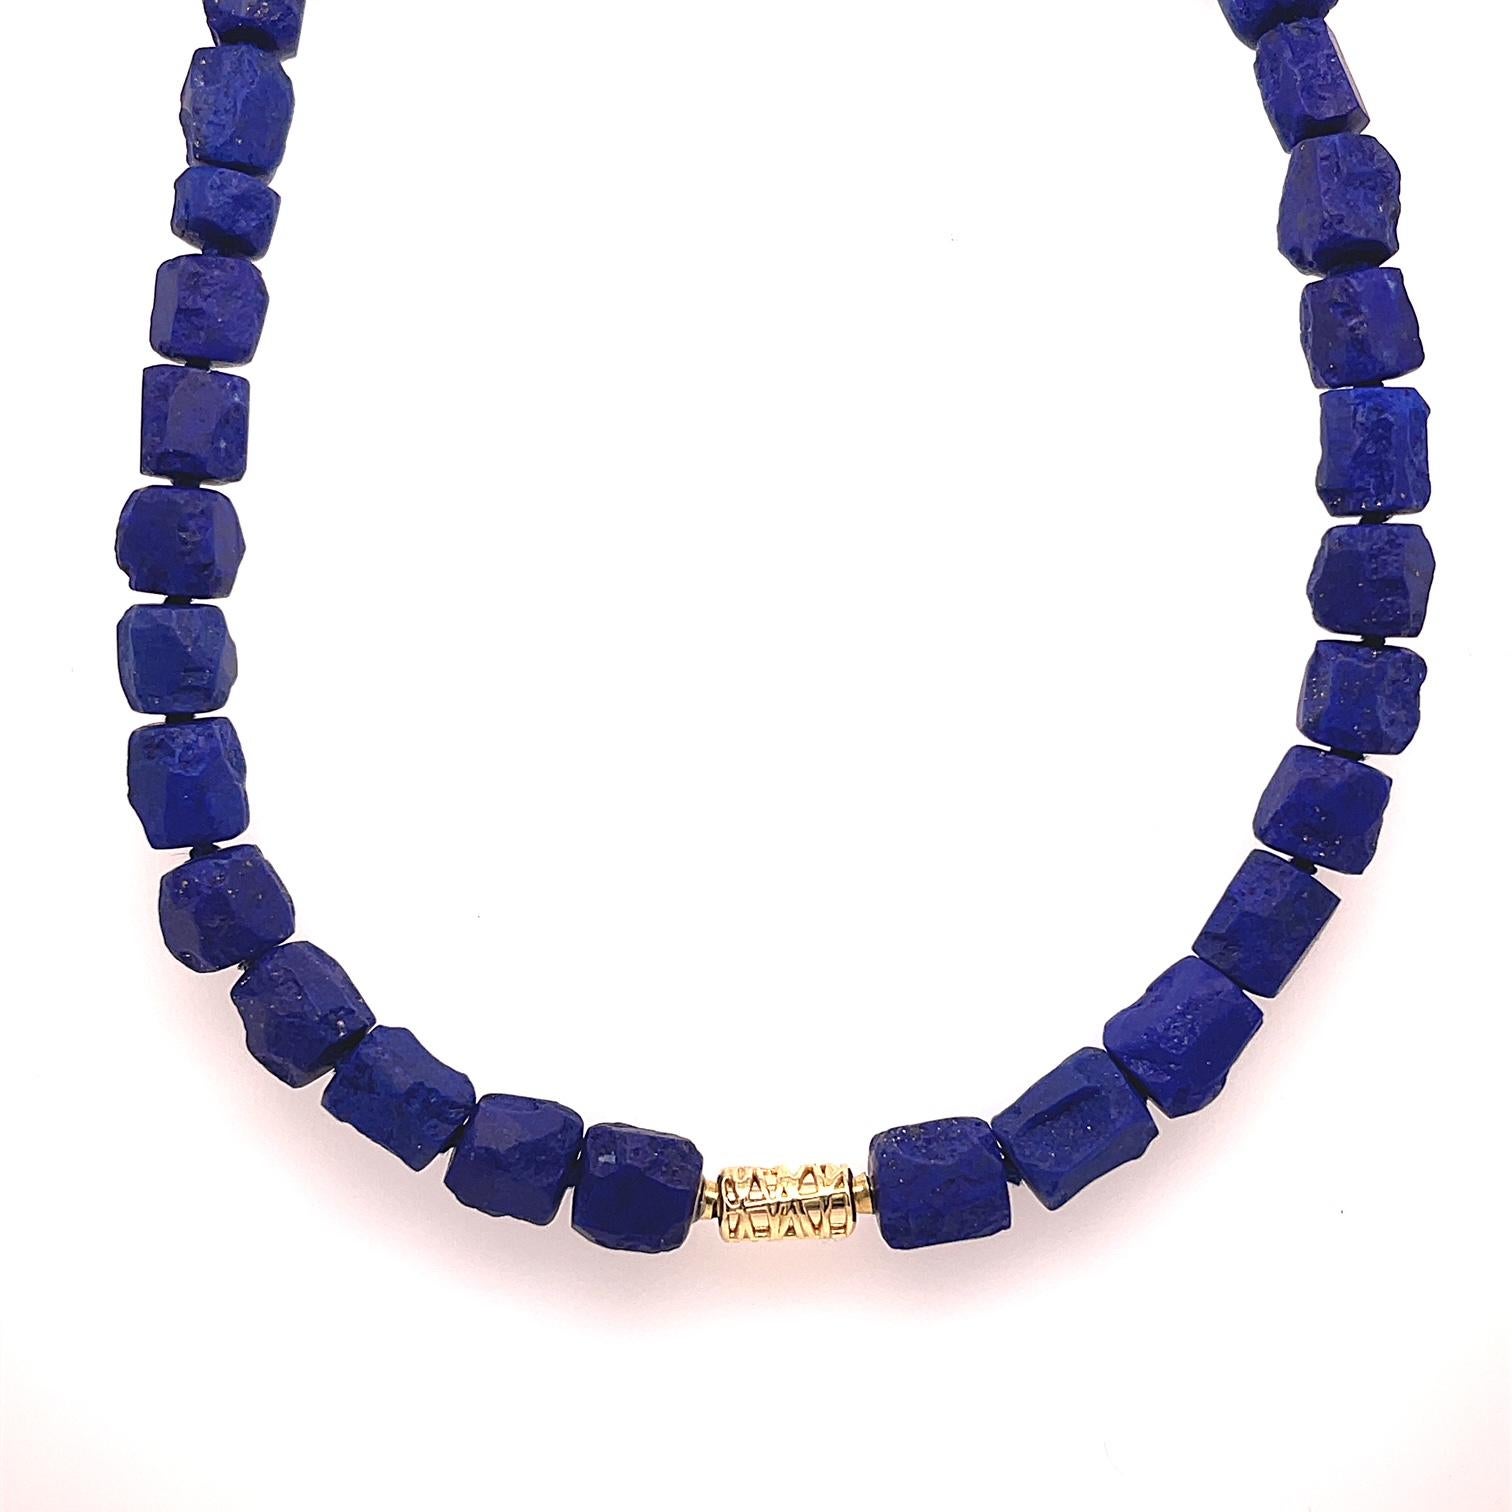 A 156 carat lapis lazuli nugget necklace, untreated from Afghanistan necklace with 18k yellow gold modullyn nittle parts, with a sterling silver clasp bezel set with a piece of Steve Walters onyx/ tourmaline/ hemetite/ 18k yellow gold/ peridot/